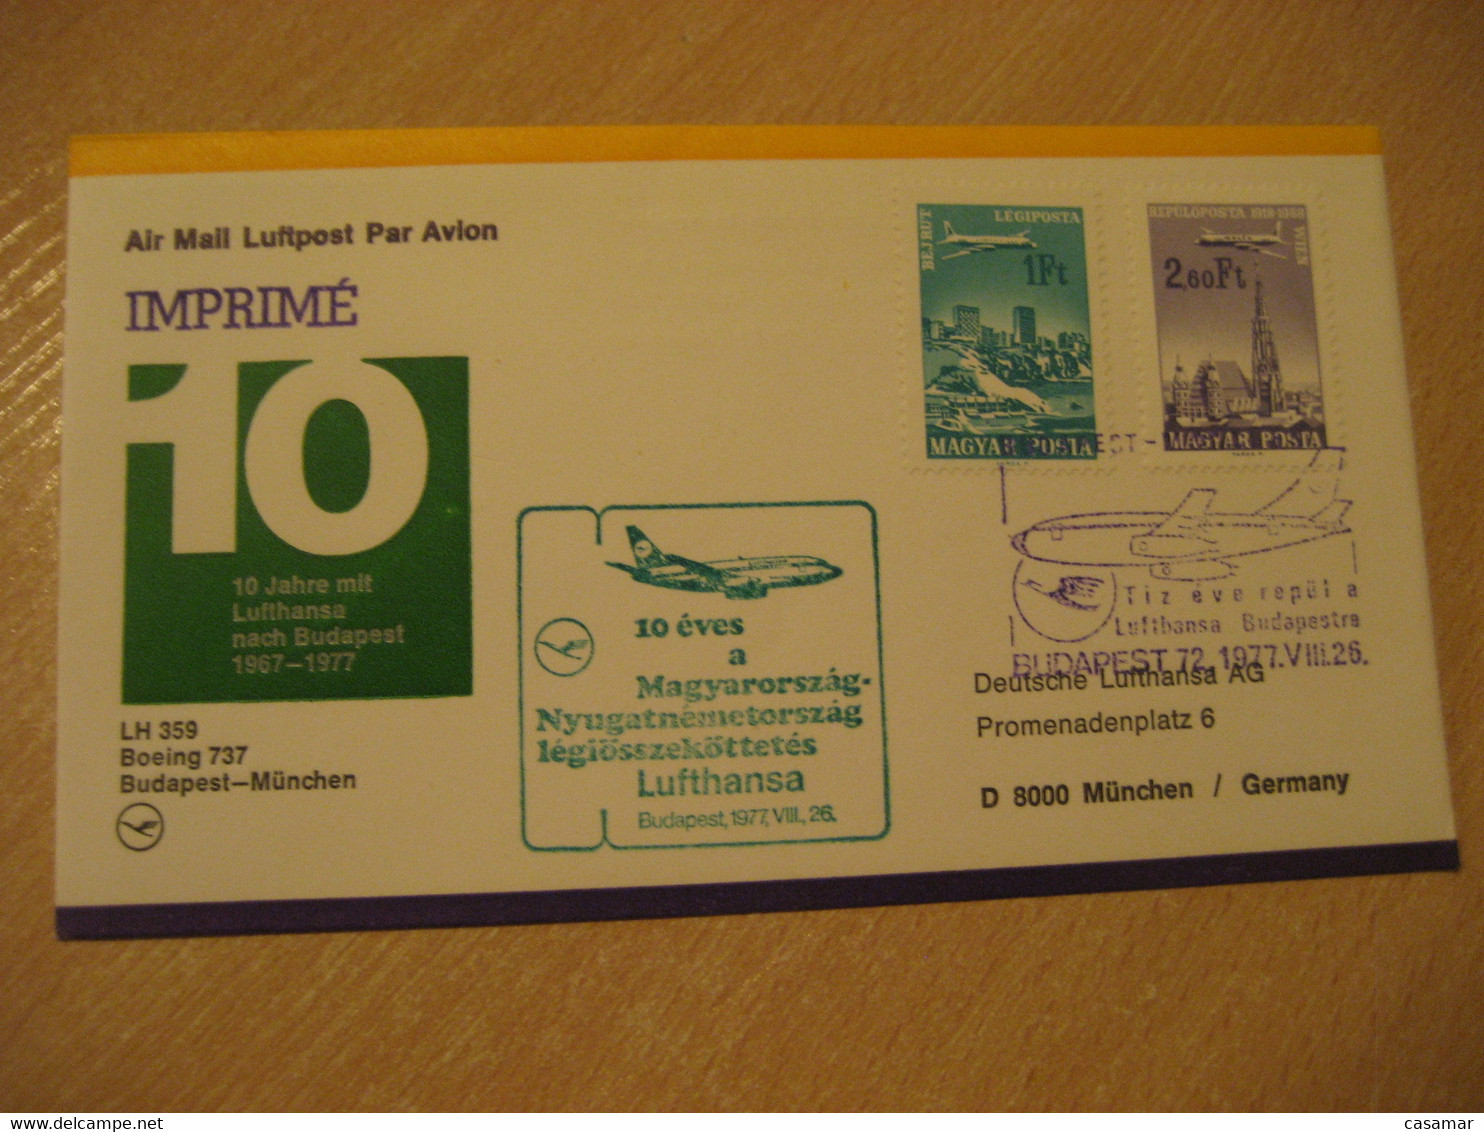 BUDAPEST Munchen 1977 Lufthansa Airlines Airline Boeing 737 First Flight Green Cancel Cover HUNGARY GERMANY - Cartas & Documentos